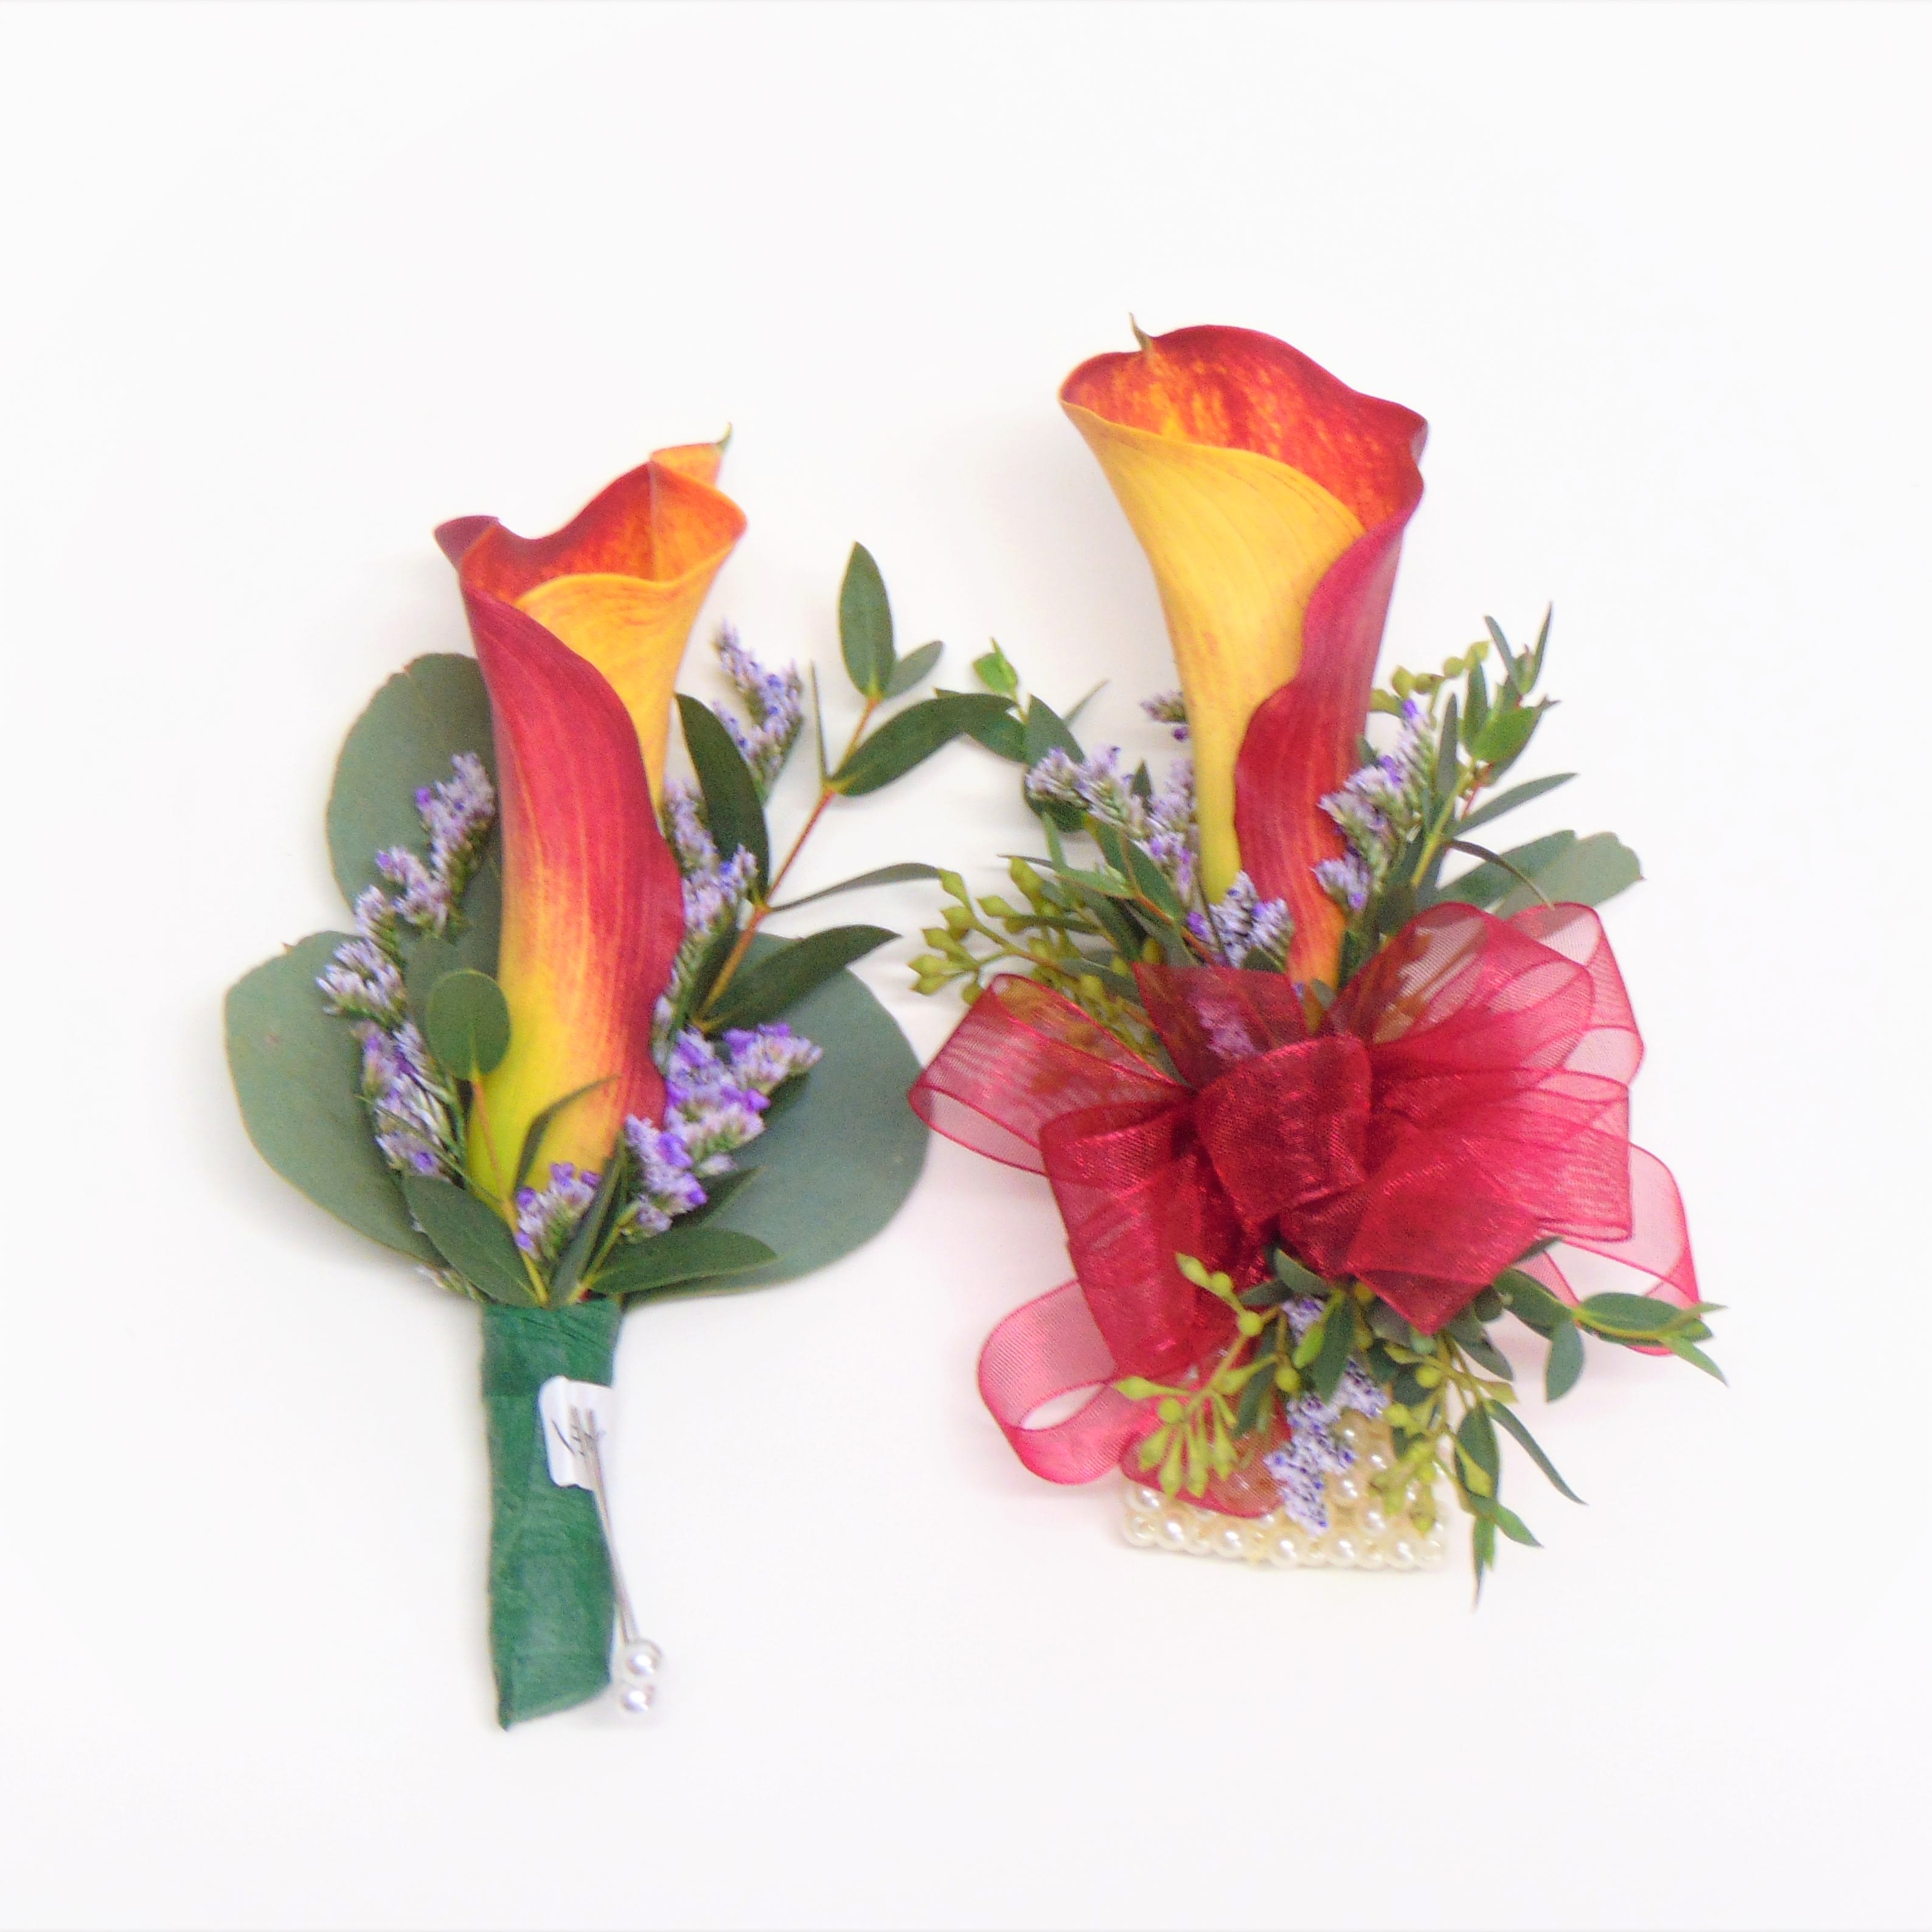 Magic Calla Lily Pair - Burnt Orange and yellow bicolor calla lily boutonniere and matching wrist corsage with burgundy ribbon, limonium and eucalyptus. Corsage is on a standard Wrislet. Standard opiton is pictured. Deluxe option adds bling. Boxes are included.